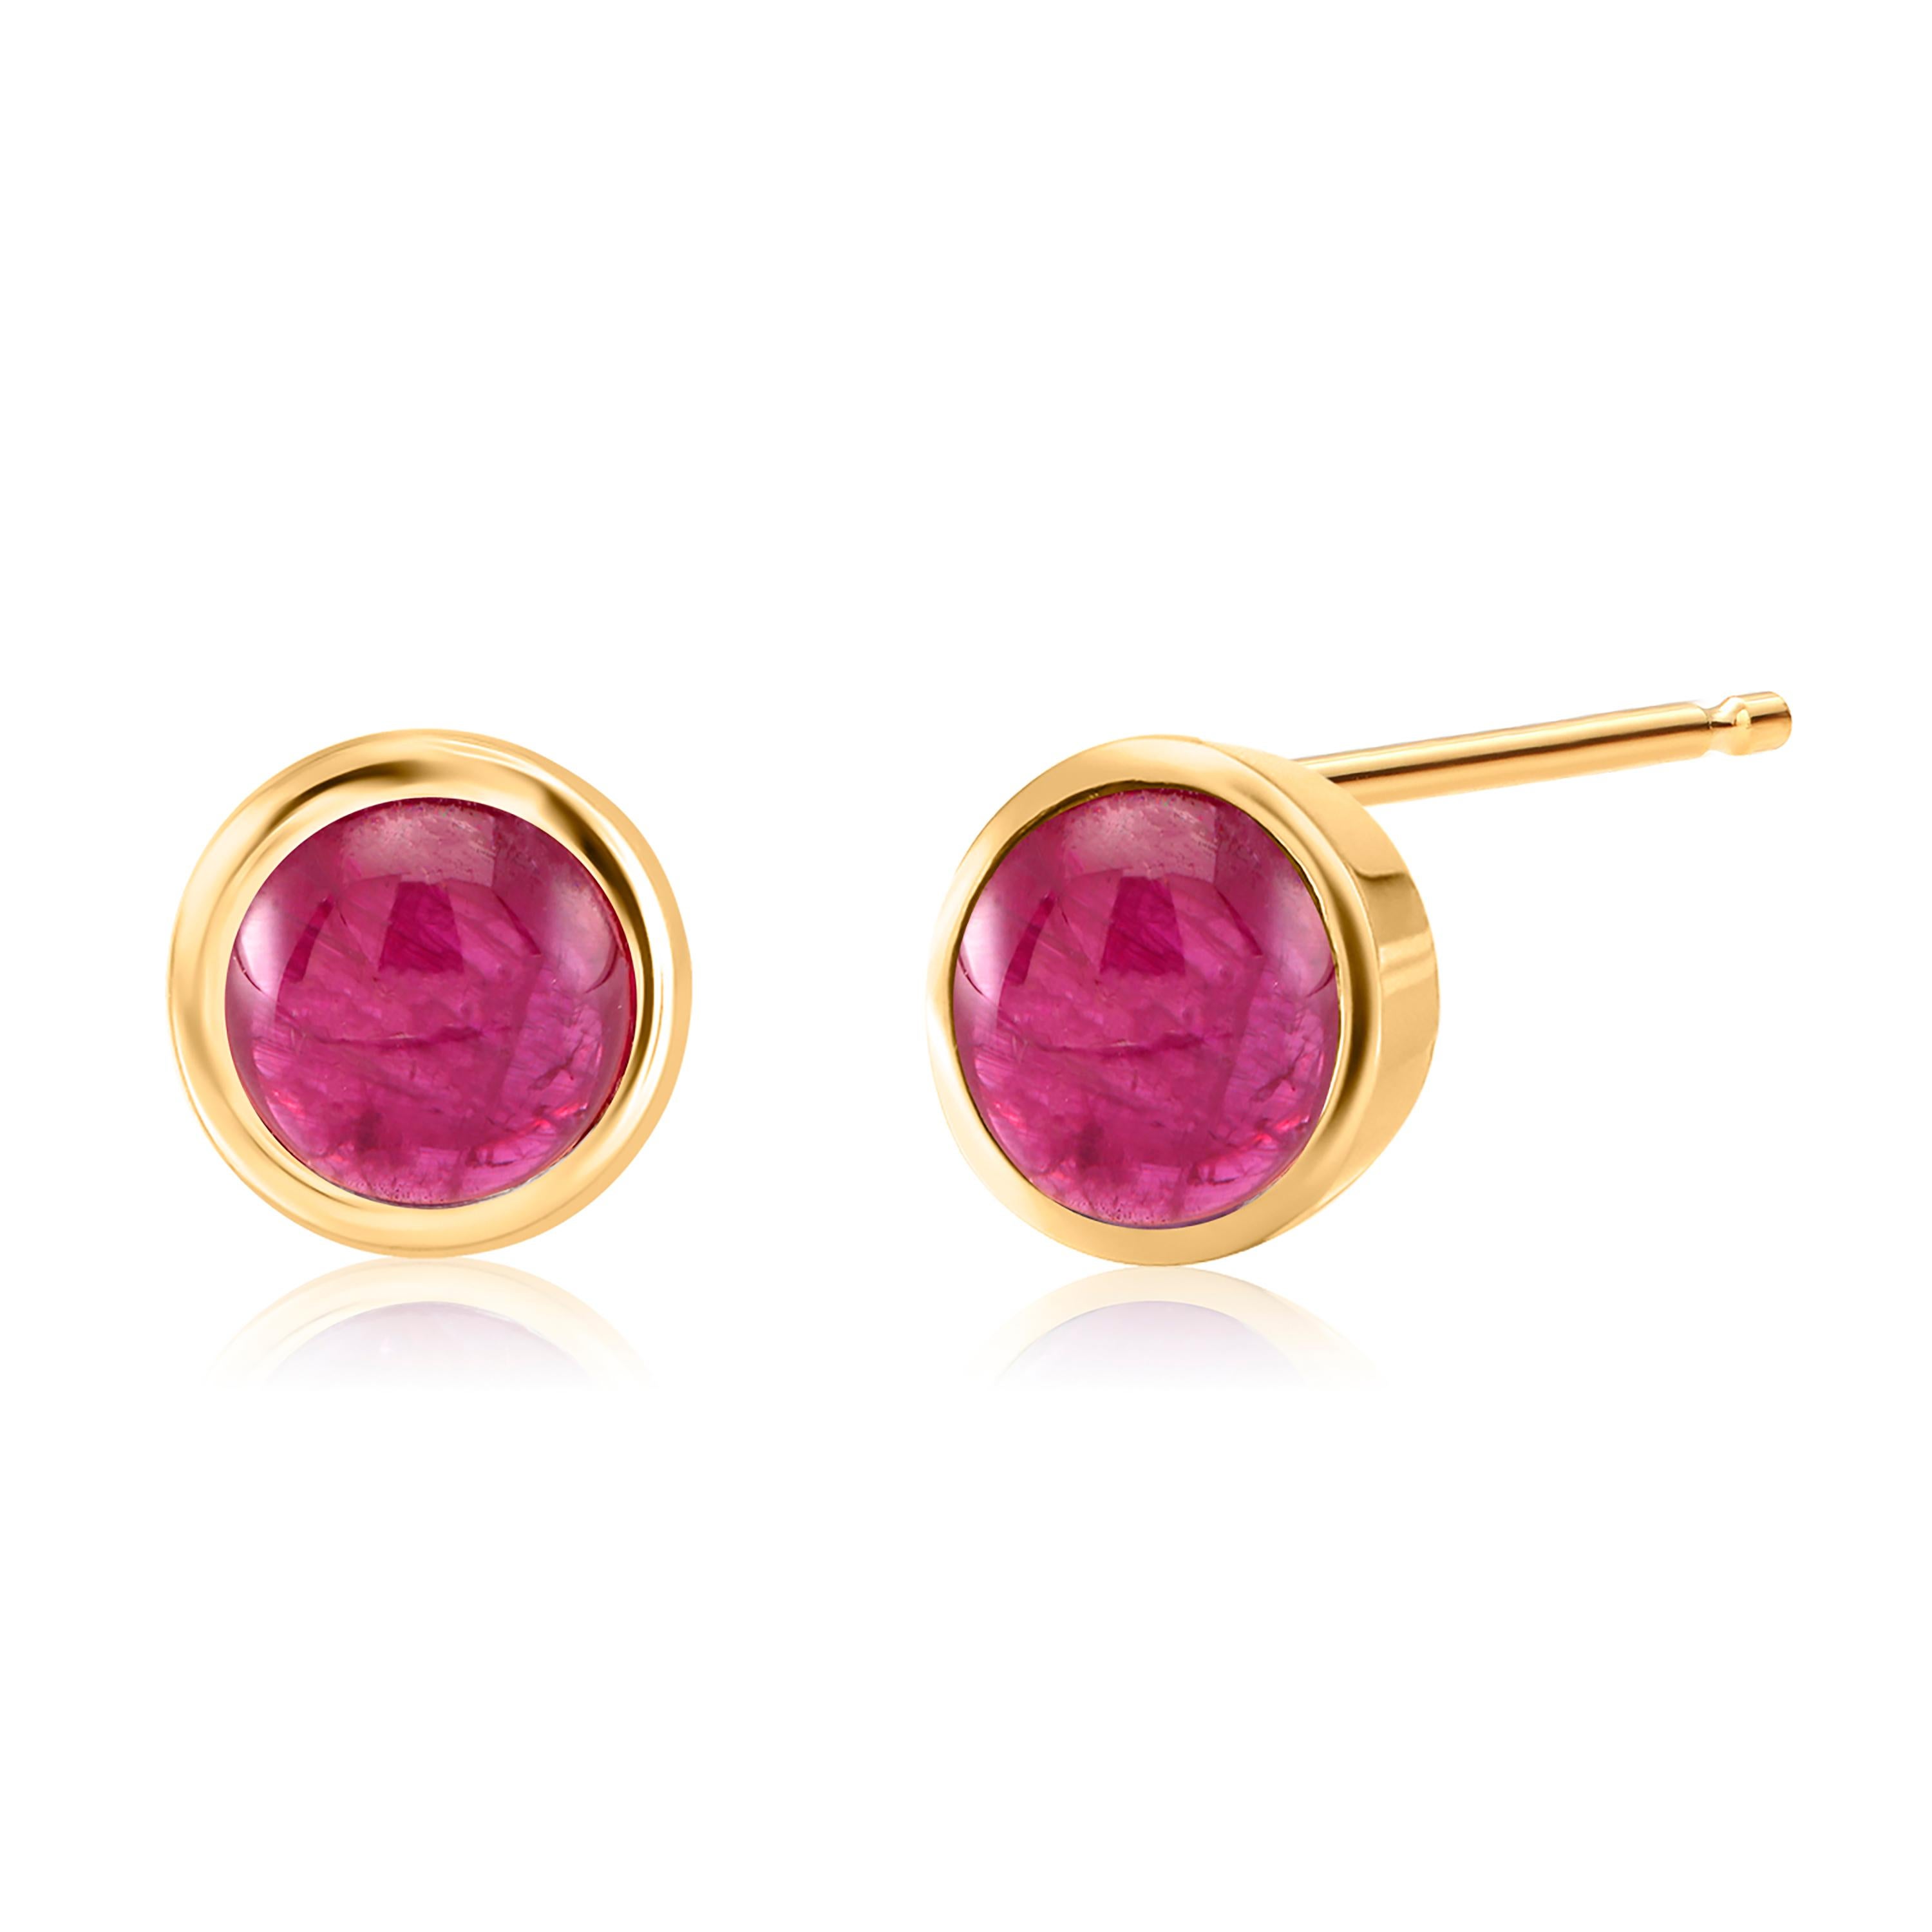 Round Cut Matched Cabochon Ruby 2.95 Carat Bezel Set Yellow Gold 0.25 Inch Stud Earrings